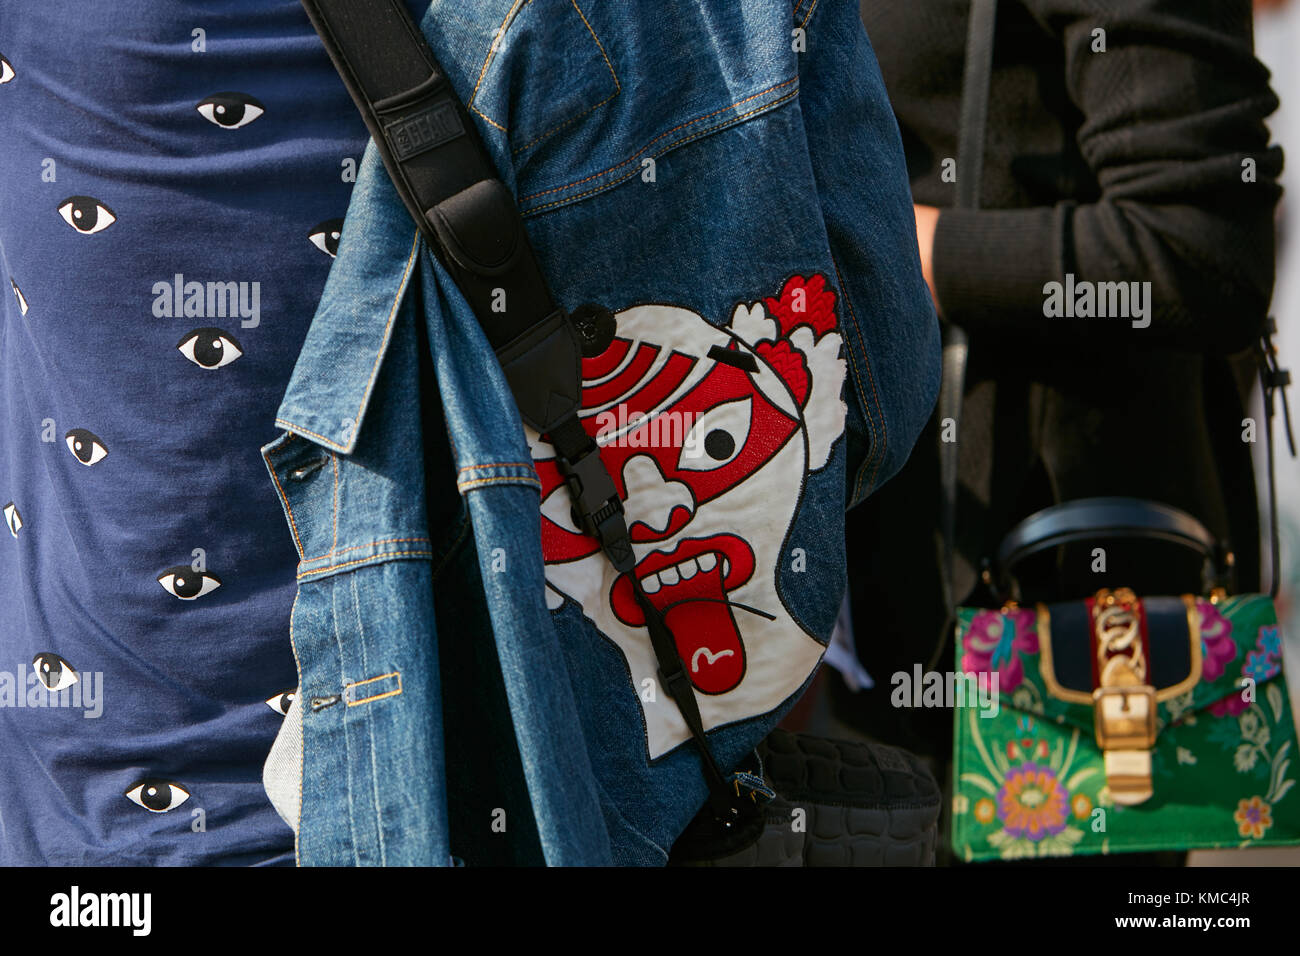 MILAN - SEPTEMBER 23: Woman with blue jeans jacket with white and red clown head design before Gabriele Colangelo fashion show, Milan Fashion Week str Stock Photo